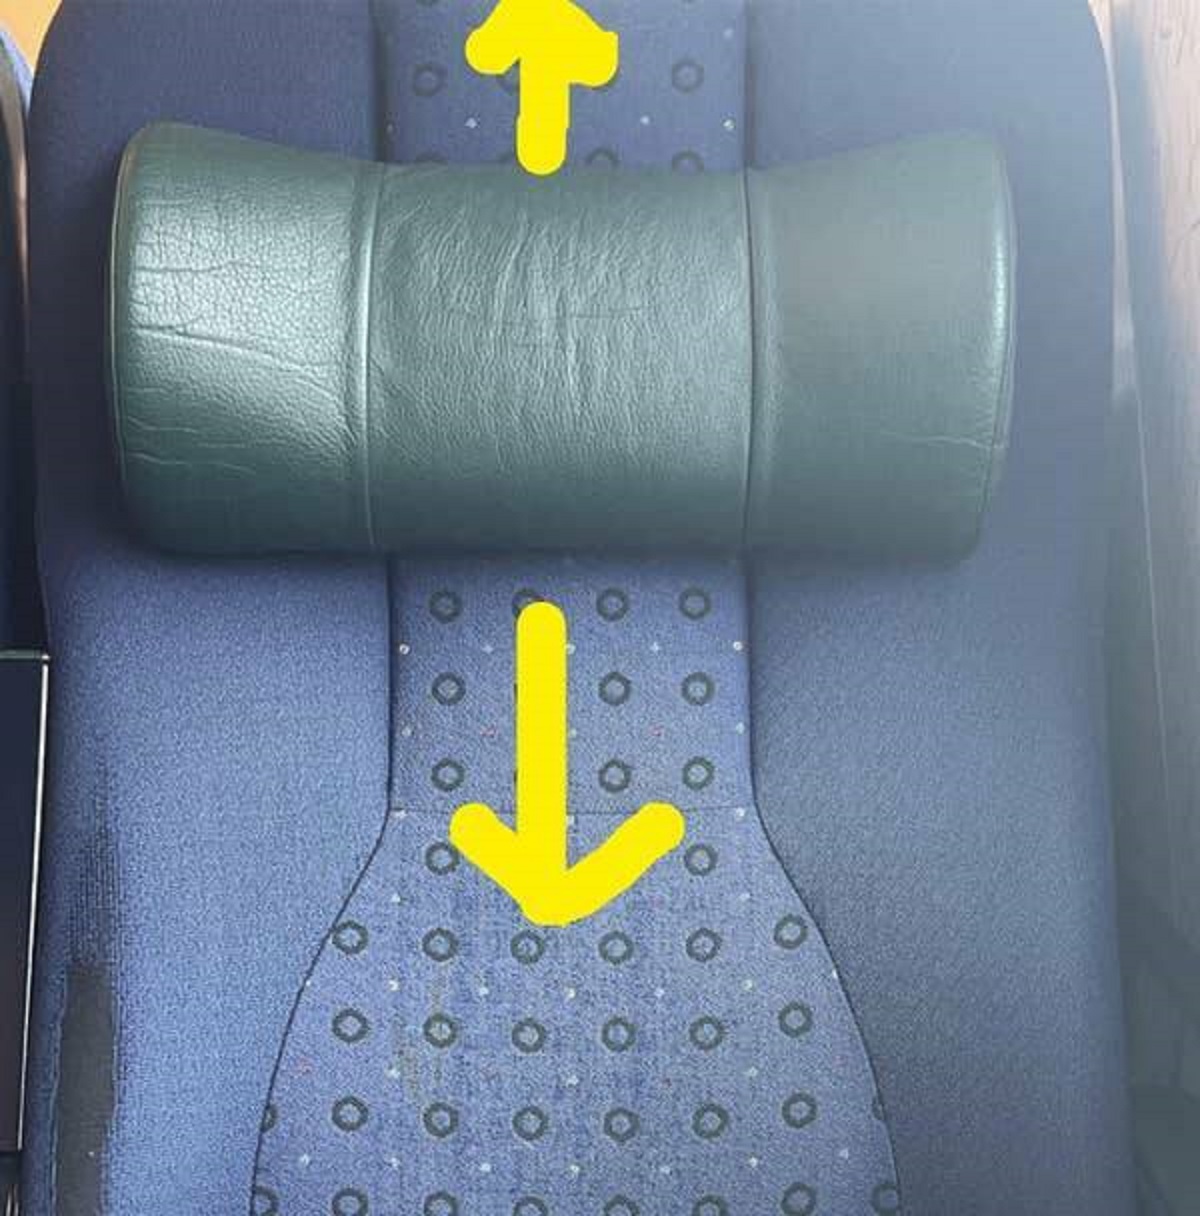 You can actually move this headrest from a transport in Denmark to whatever height you need.